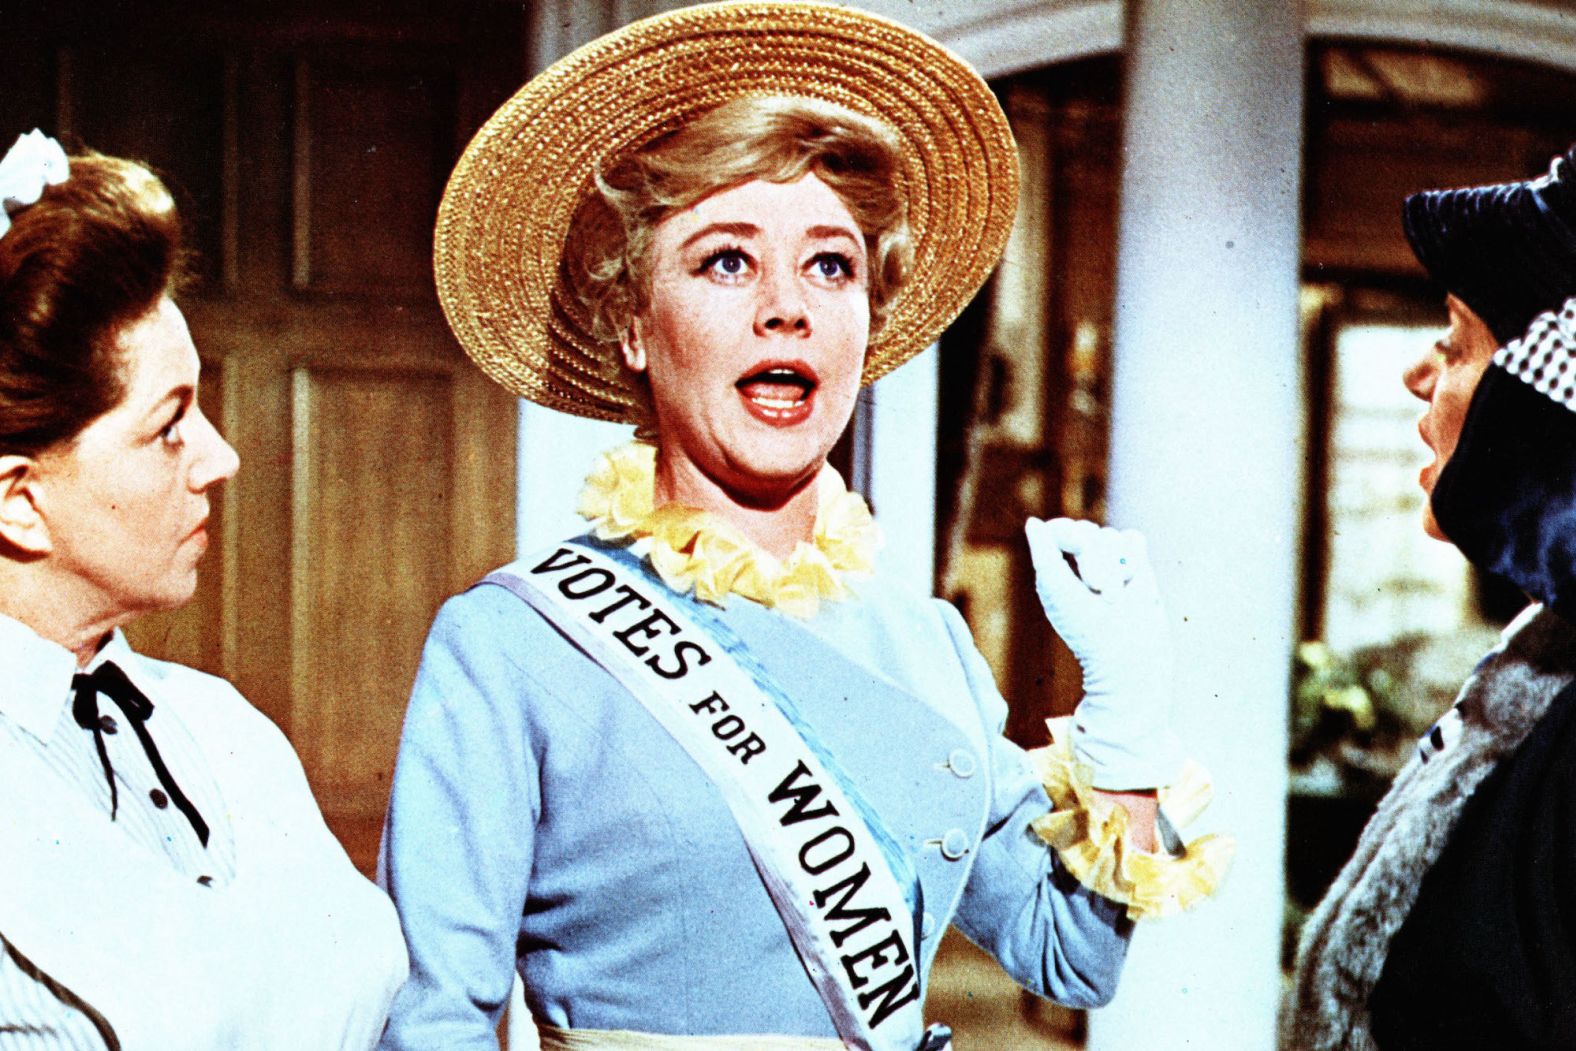 <a href="https://www.cnn.com/2024/01/04/entertainment/glynis-johns-dead/index.html" target="_blank">Glynis Johns</a>, the British actress known for her role as feminist icon Mrs. Banks in 1964's "Mary Poppins," died on January 4, her longtime manager Mitch Clem told CNN. She was 100. Johns' career as a film, TV and stage actor spanned nearly nine decades.